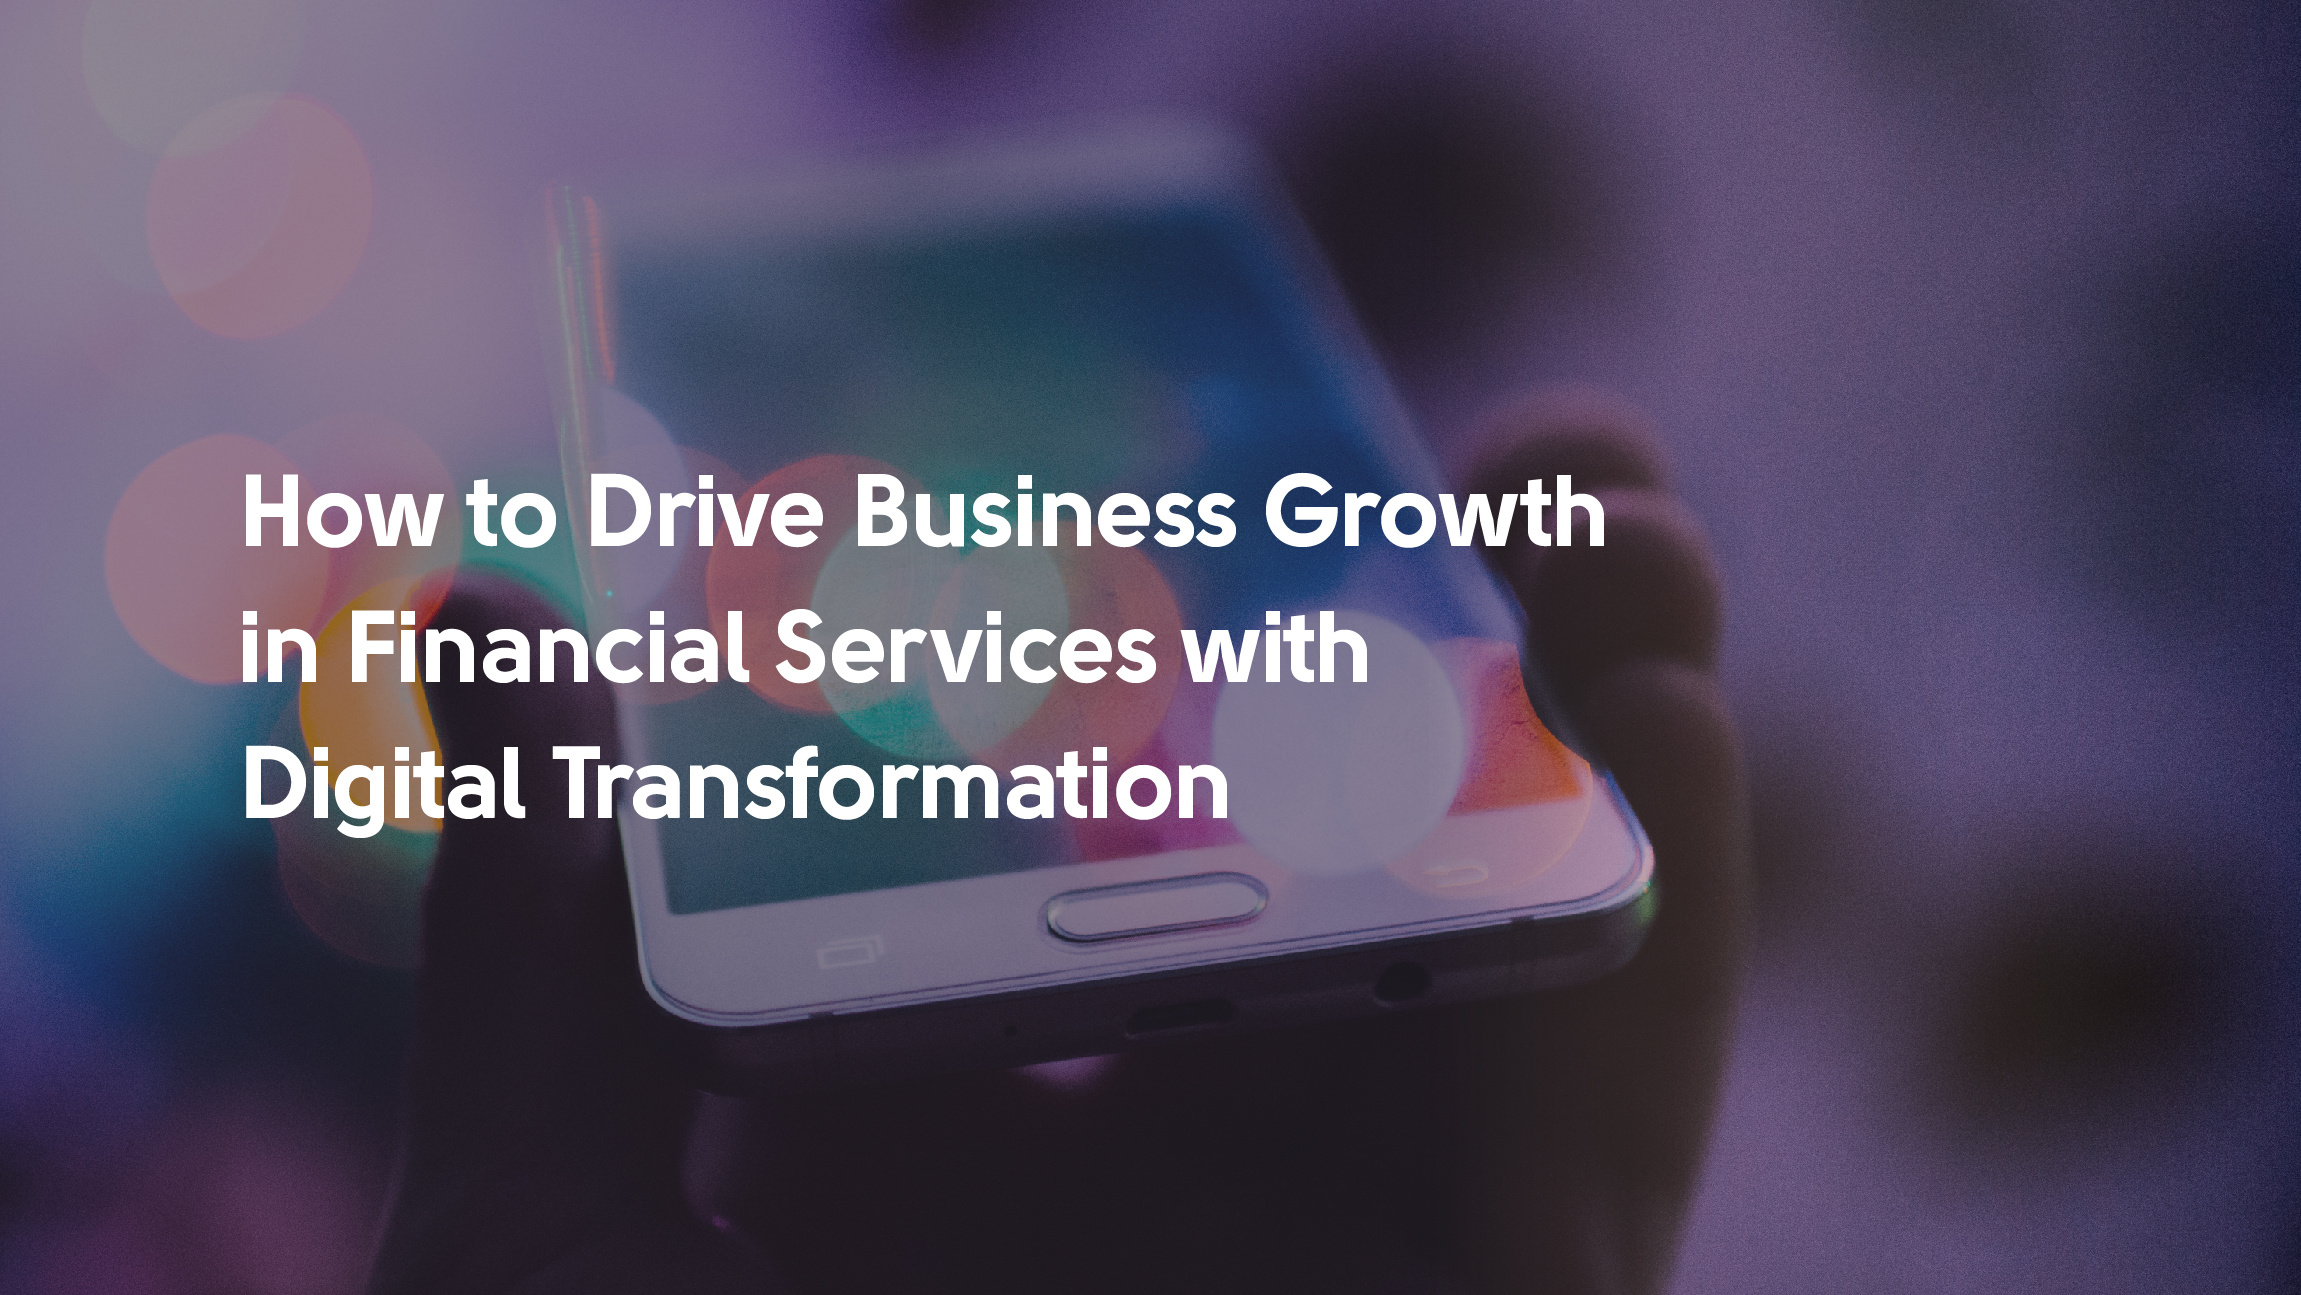 Revolutionizing customer experience; a shift towards personalized services  and seamless solutions - The Business & Financial Times